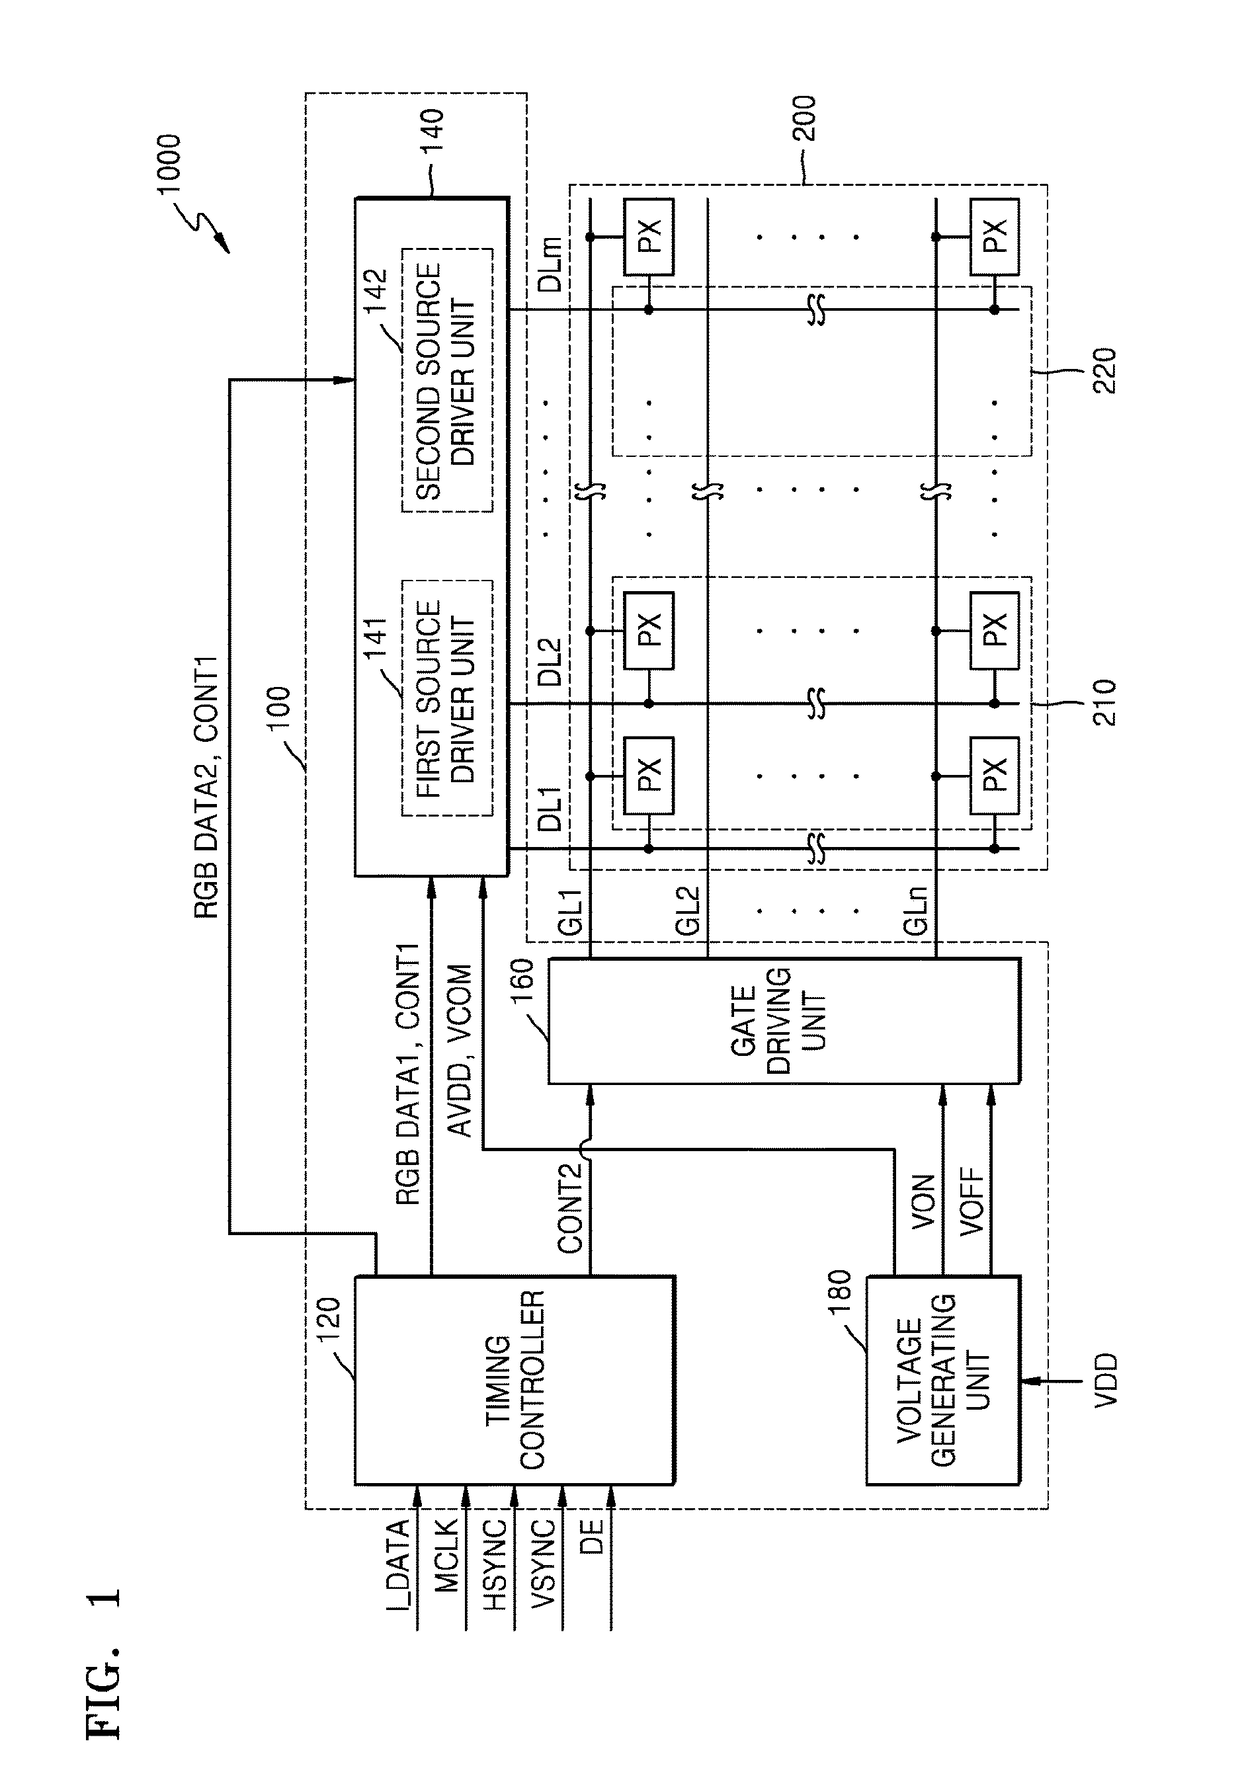 Display driving device, display device and operating method thereof